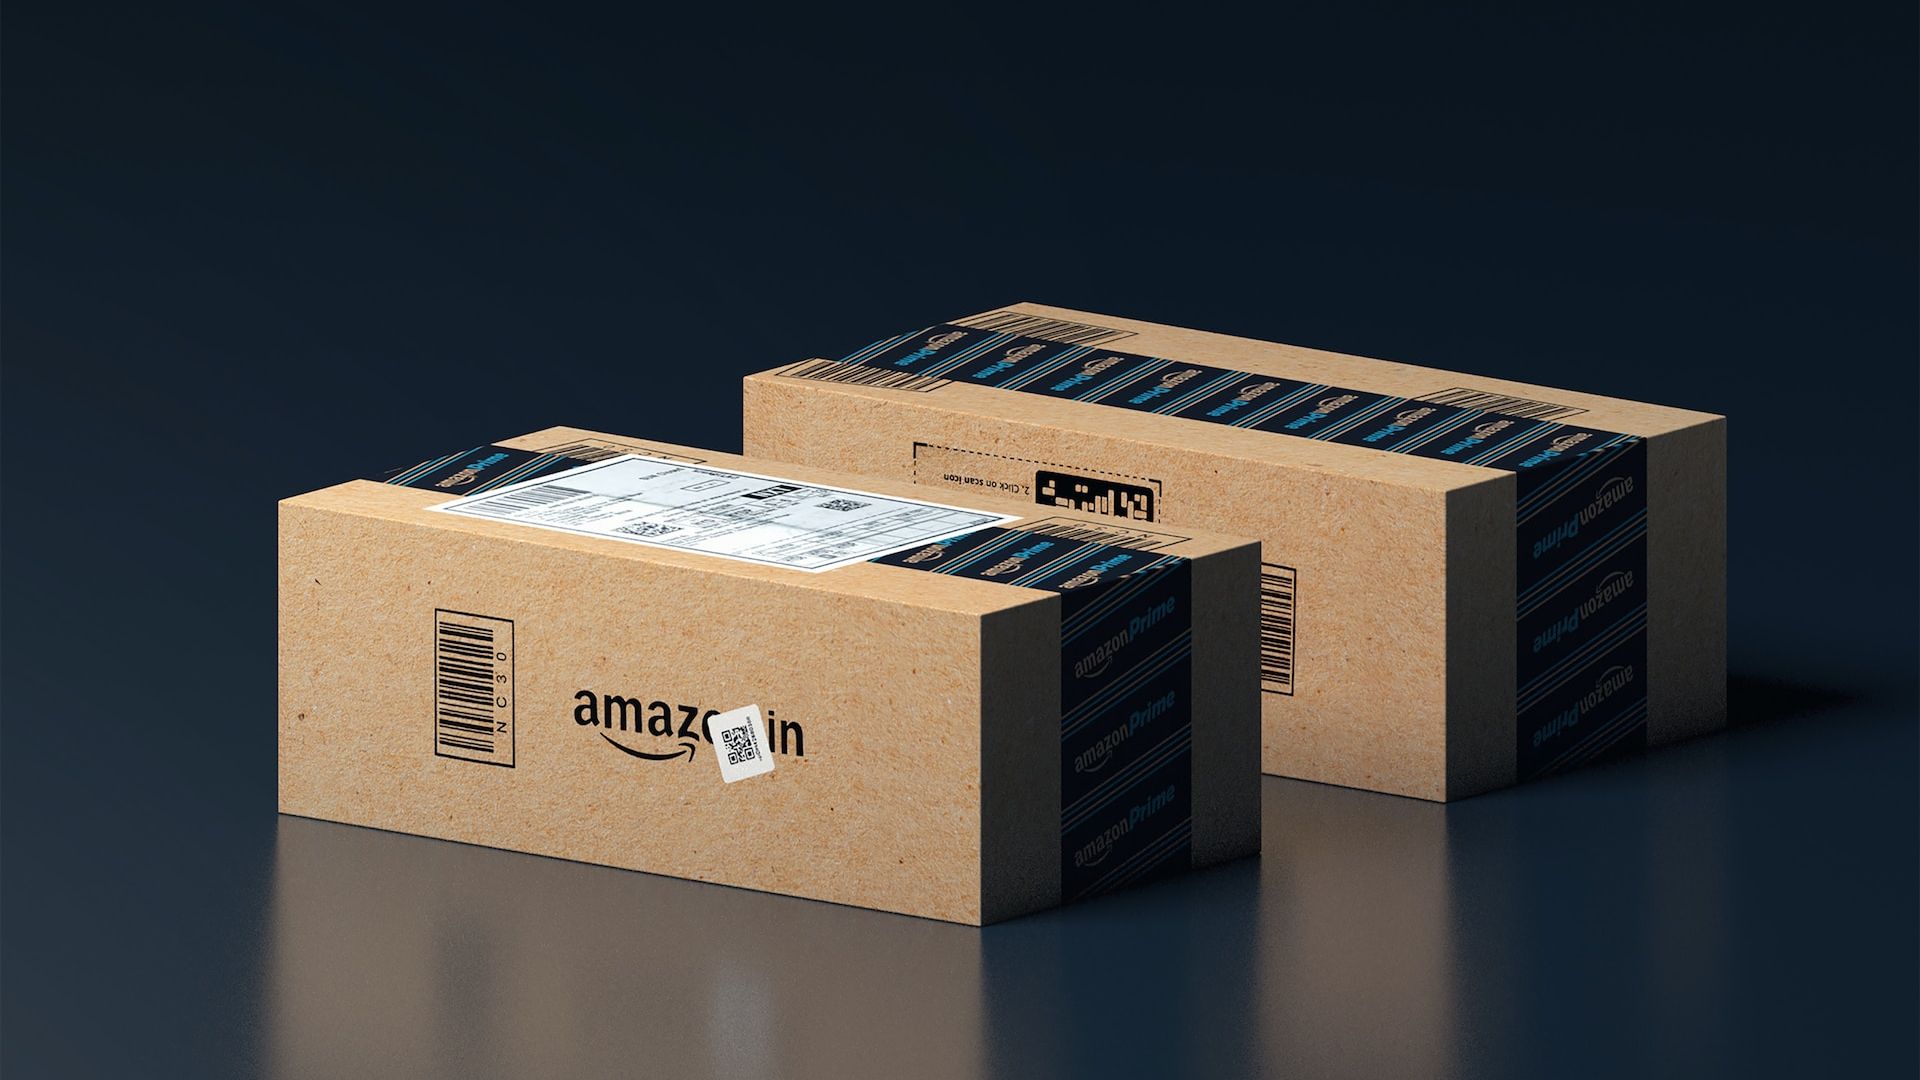 Two Amazon boxes sit on a blue surface. 